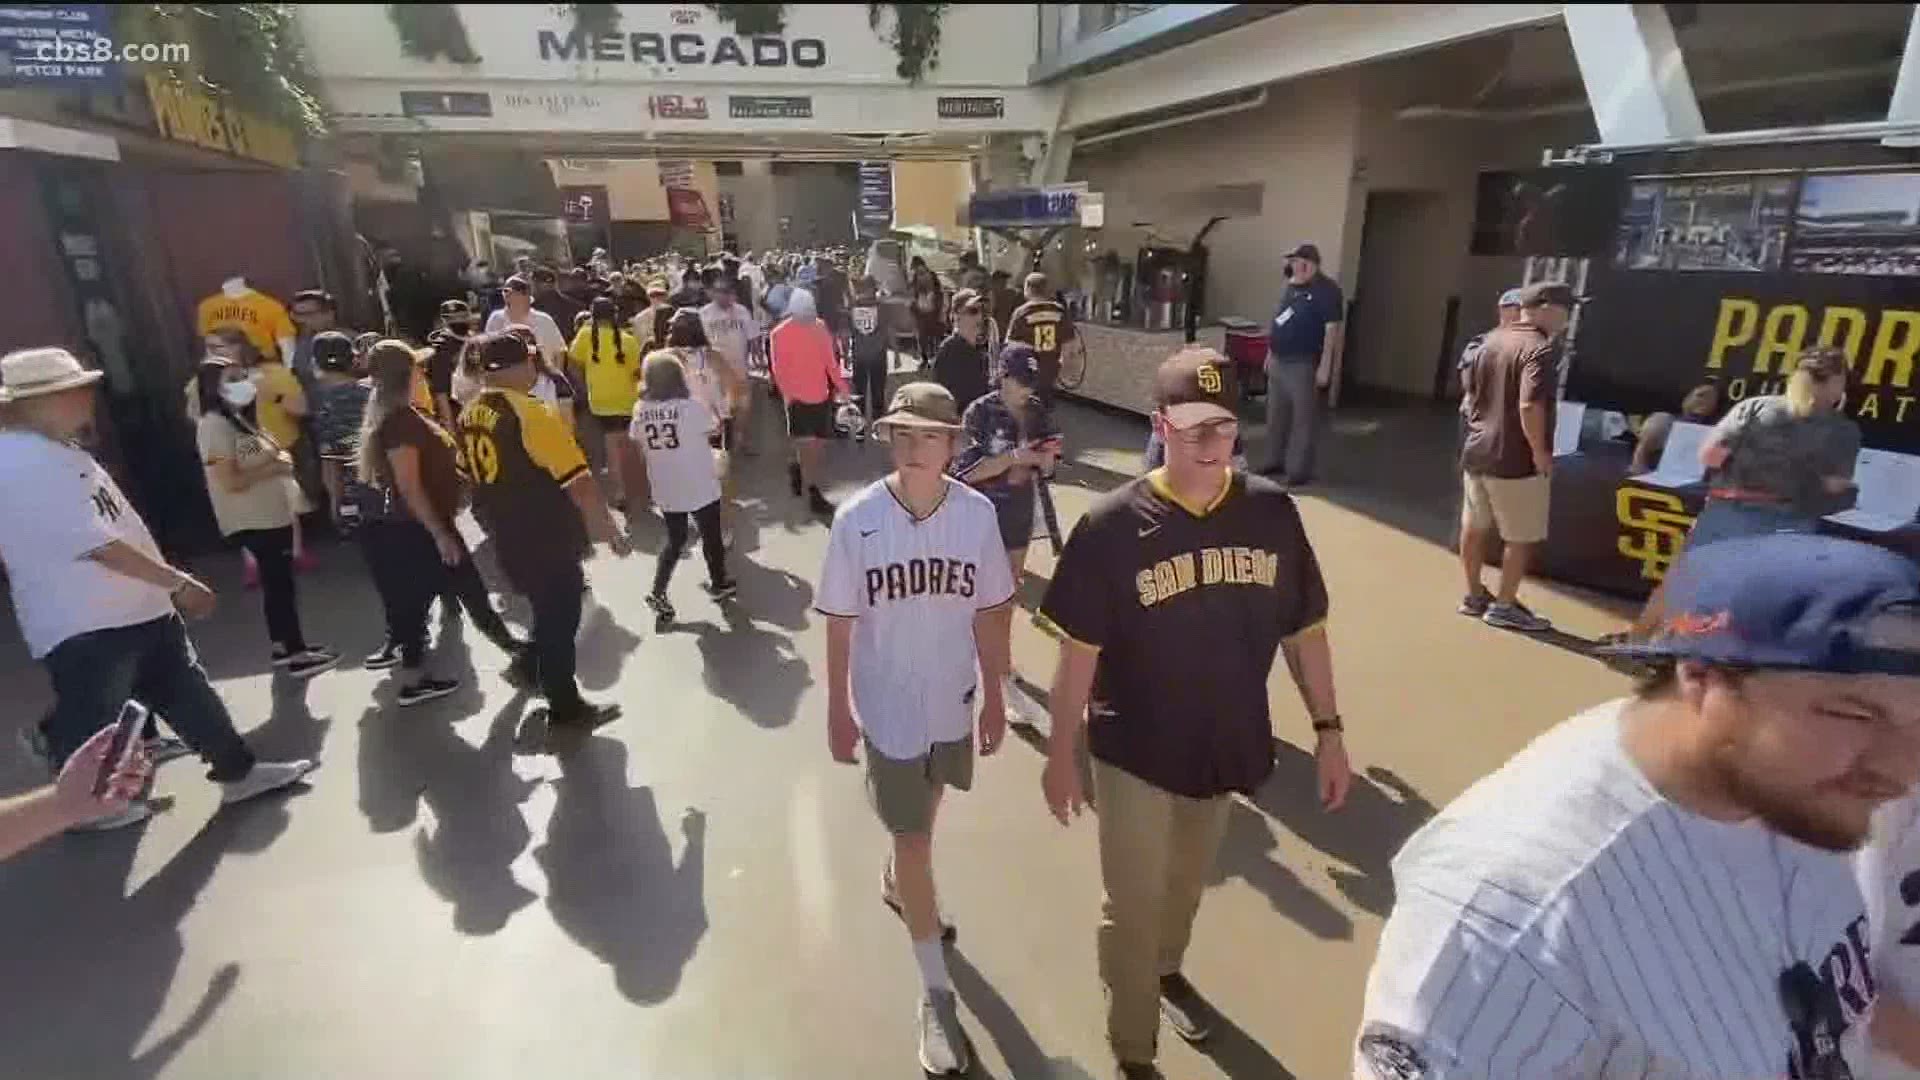 San Diego Padres host Reds at Petco Park for full capacity game